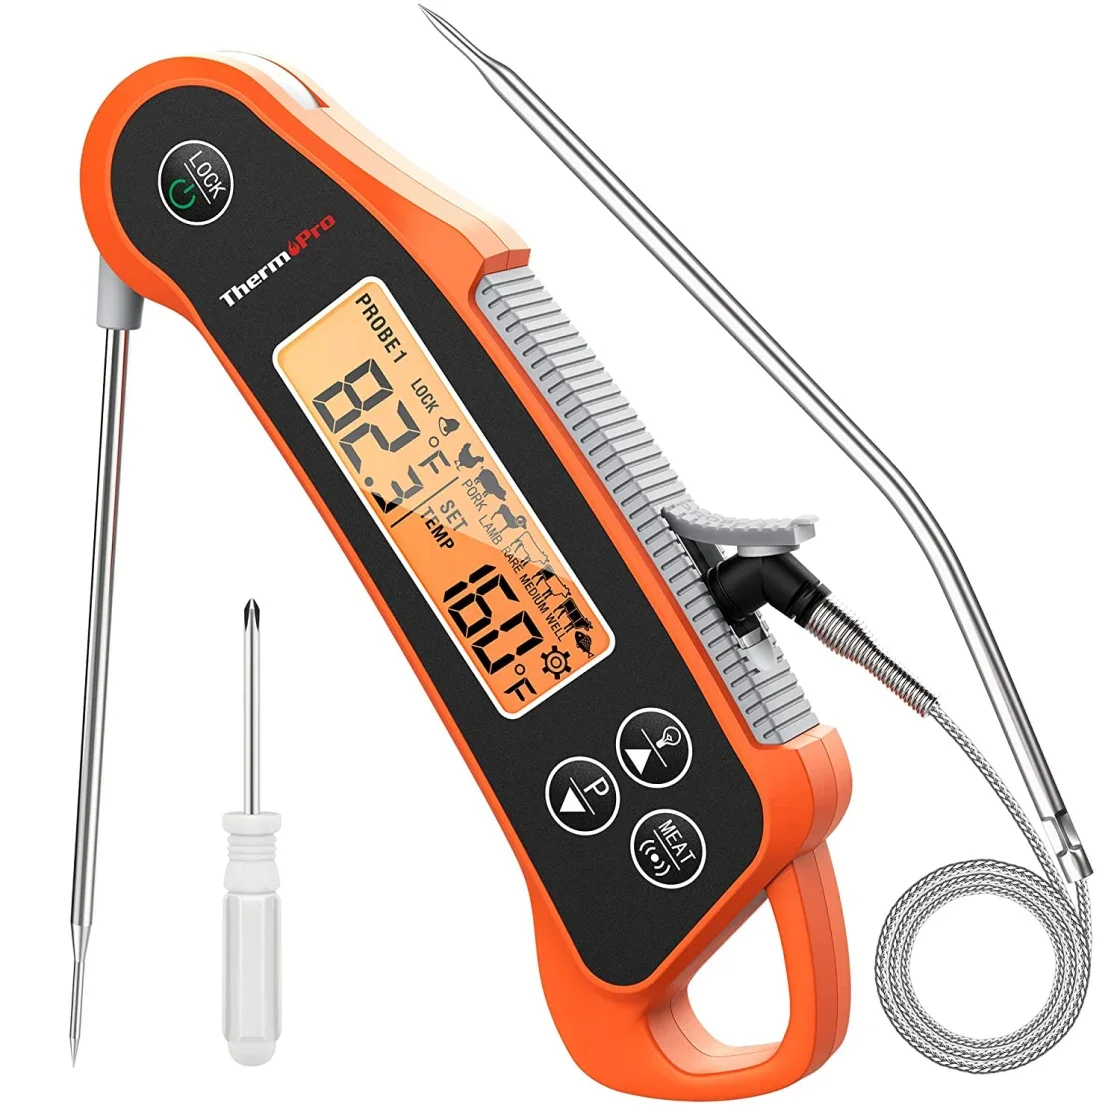 ThermoPro launches smart dual probe meat thermometer with